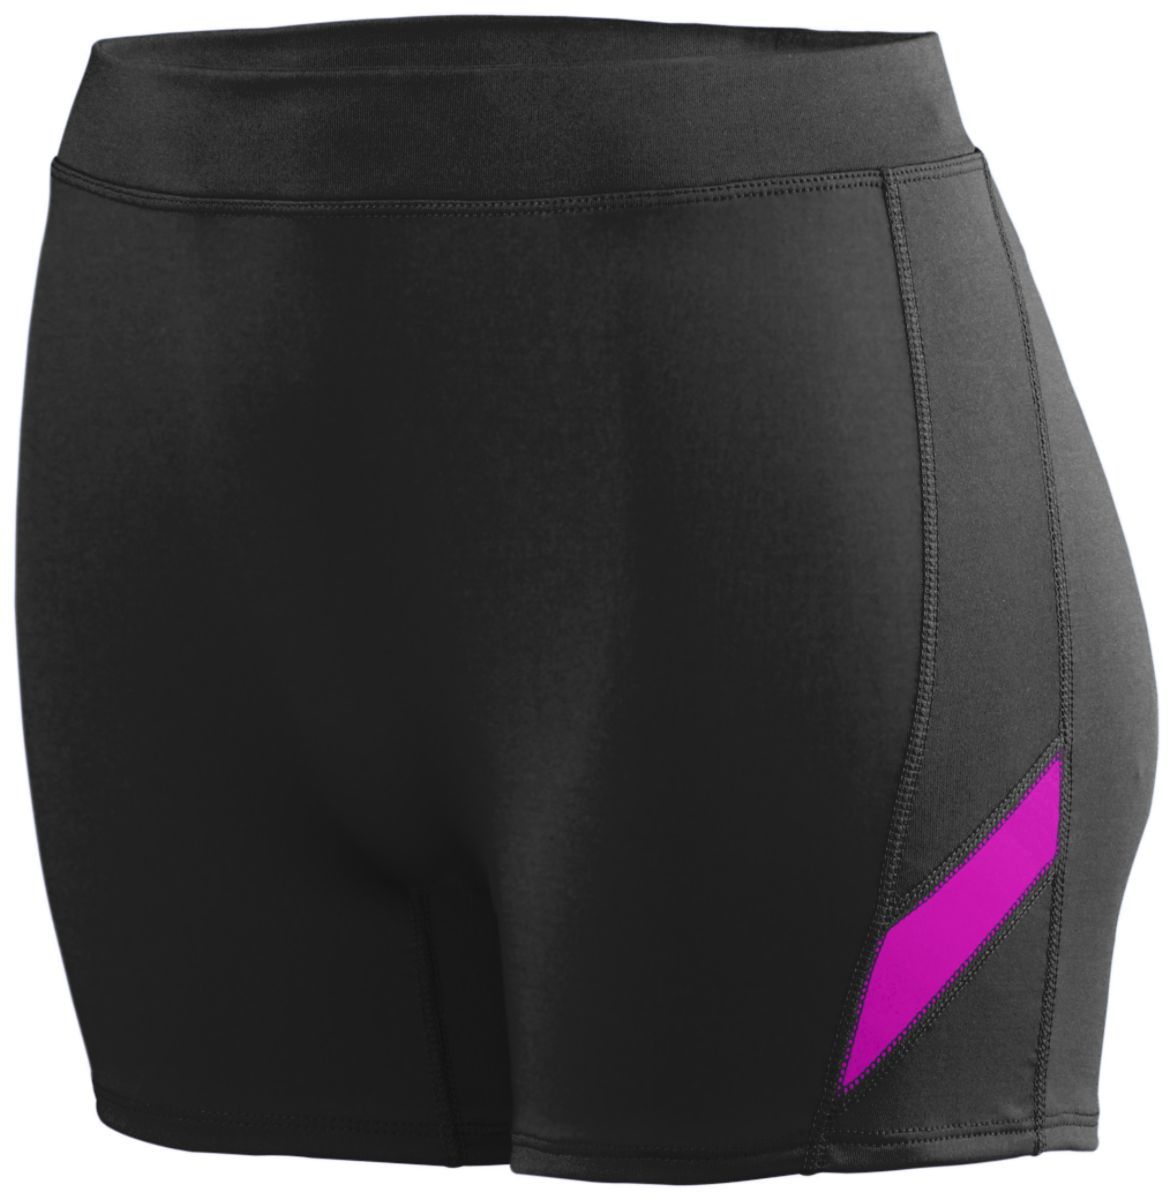 Augusta Sportswear Ladies Stride Shorts in Black/Power Pink  -Part of the Ladies, Ladies-Shorts, Augusta-Products, Volleyball product lines at KanaleyCreations.com